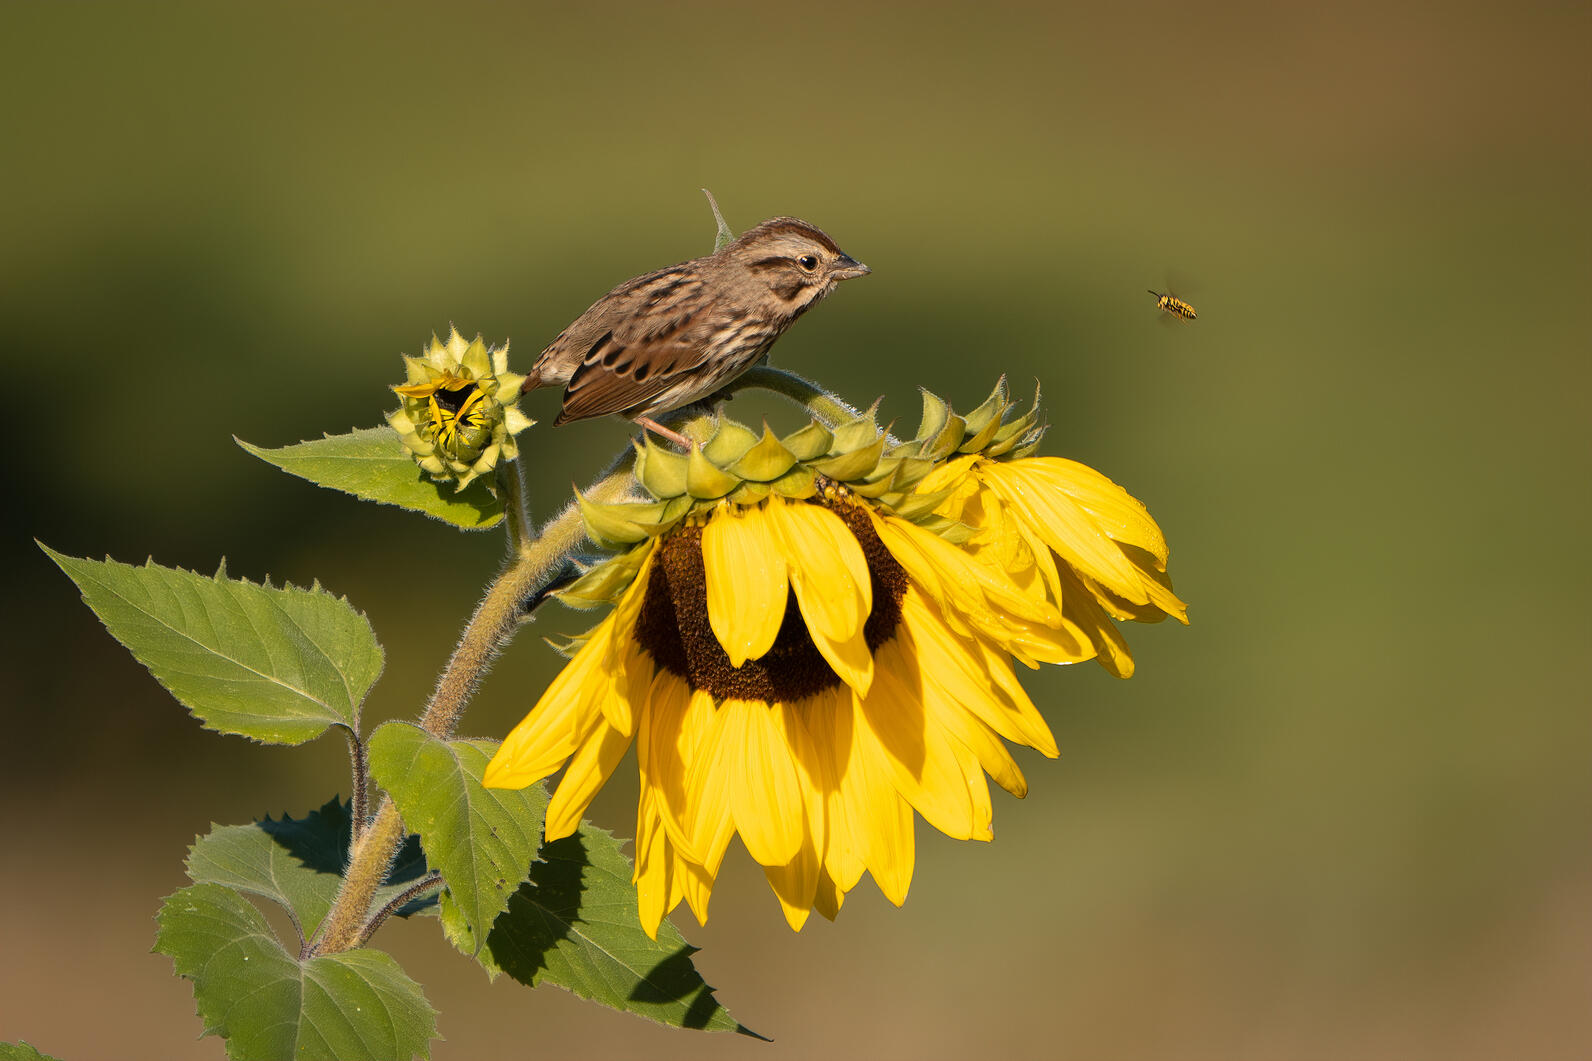 A song Sparrow sitting on the stem of a sunflower.